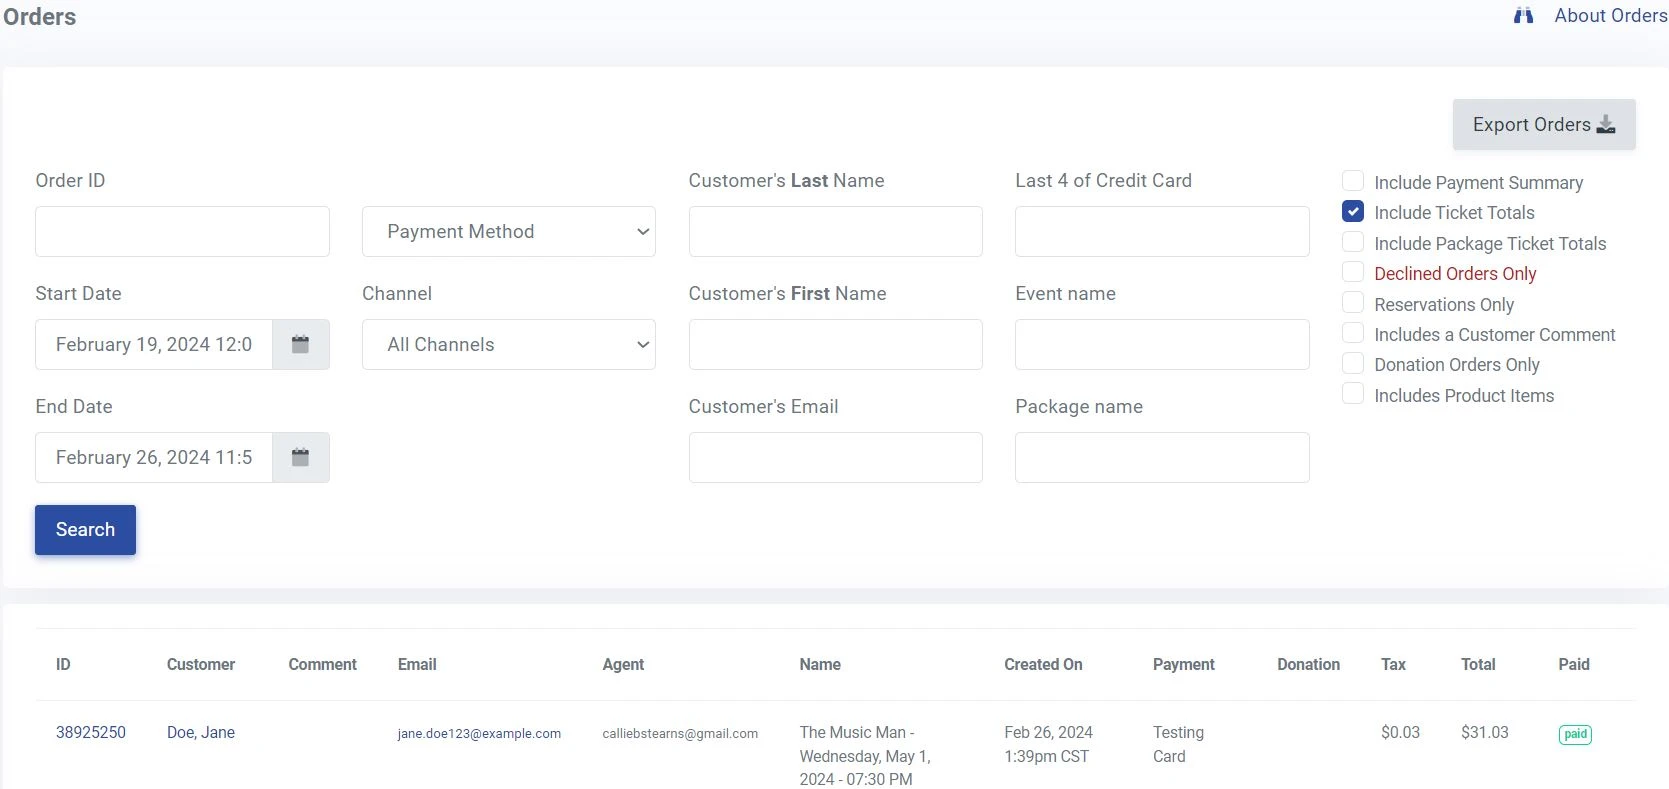 Screengrab of the Orders tab in ThunderTix. Here you can search for an order by the Order ID, the Start and End date for the date range you'd like to search for, the payment method, the channel, the Customer's First or Last Name, The customer's email address, the last four digits of the credit card, Event Name and Package Name. There is a button to the right that says Export Orders, where a user can export a list of orders found based on their search criteria. Below that are check boxes for what a user can include in the report- Payment Summary, Ticket Totals Package Ticket Totals, Declined Orders ,Reservations, if the order Includes a Customer Comment, Donation Orders, and orders that 
Include Product Items.